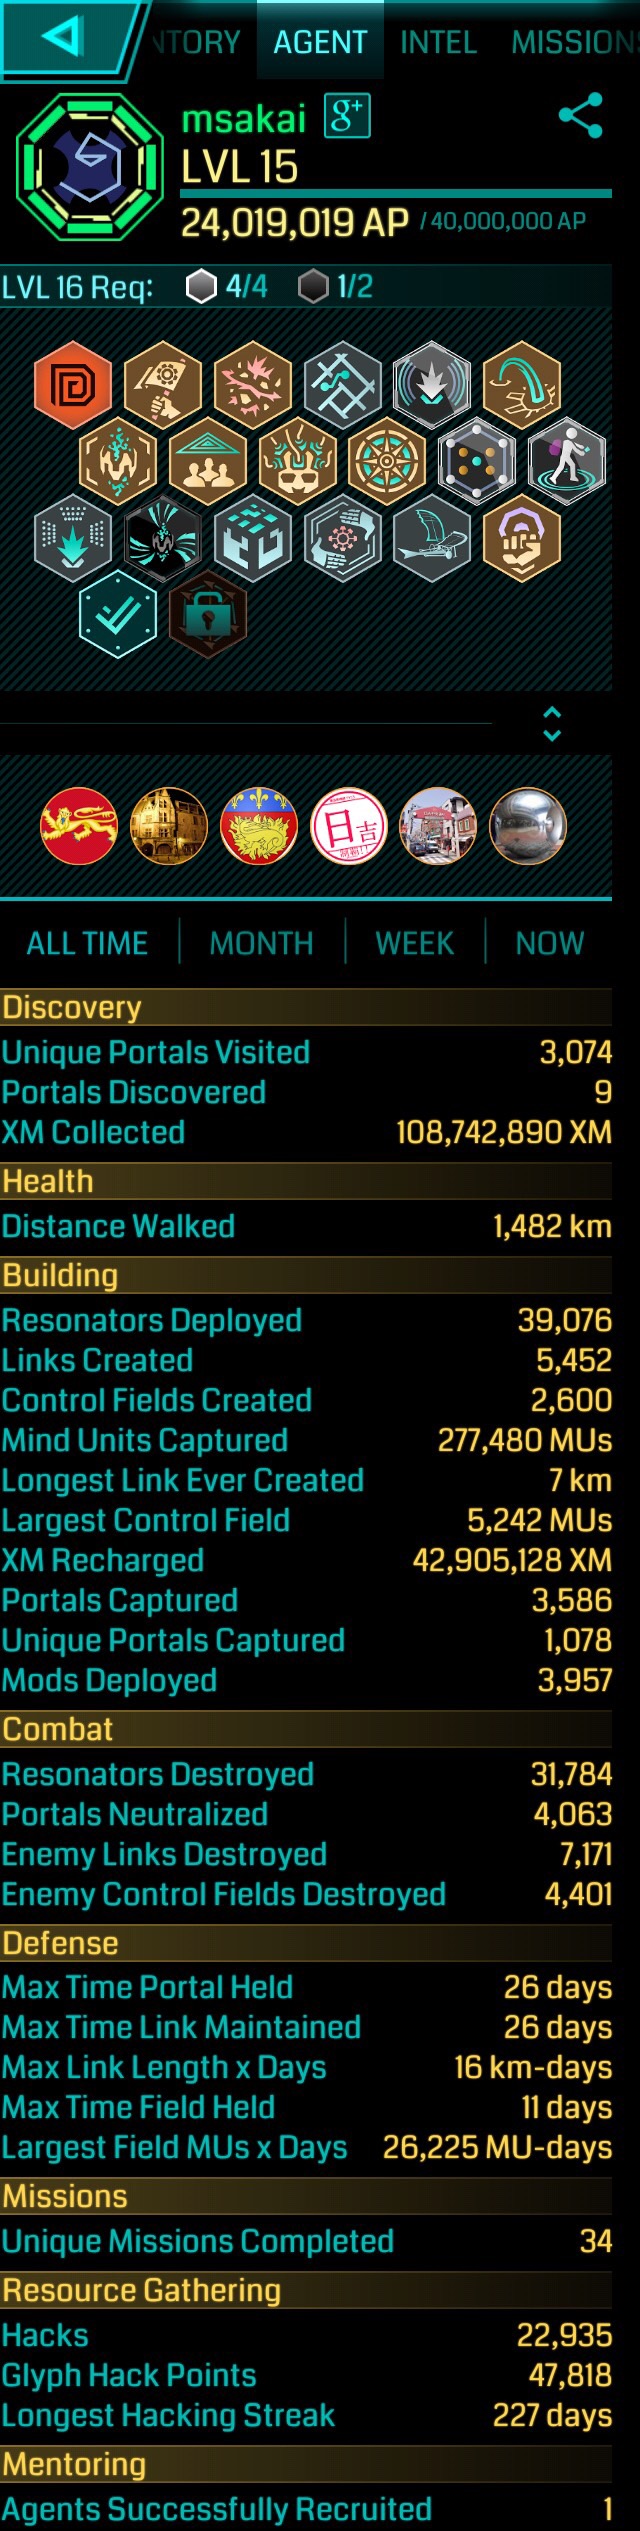 I've reached level 15 as an #Ingress agent!